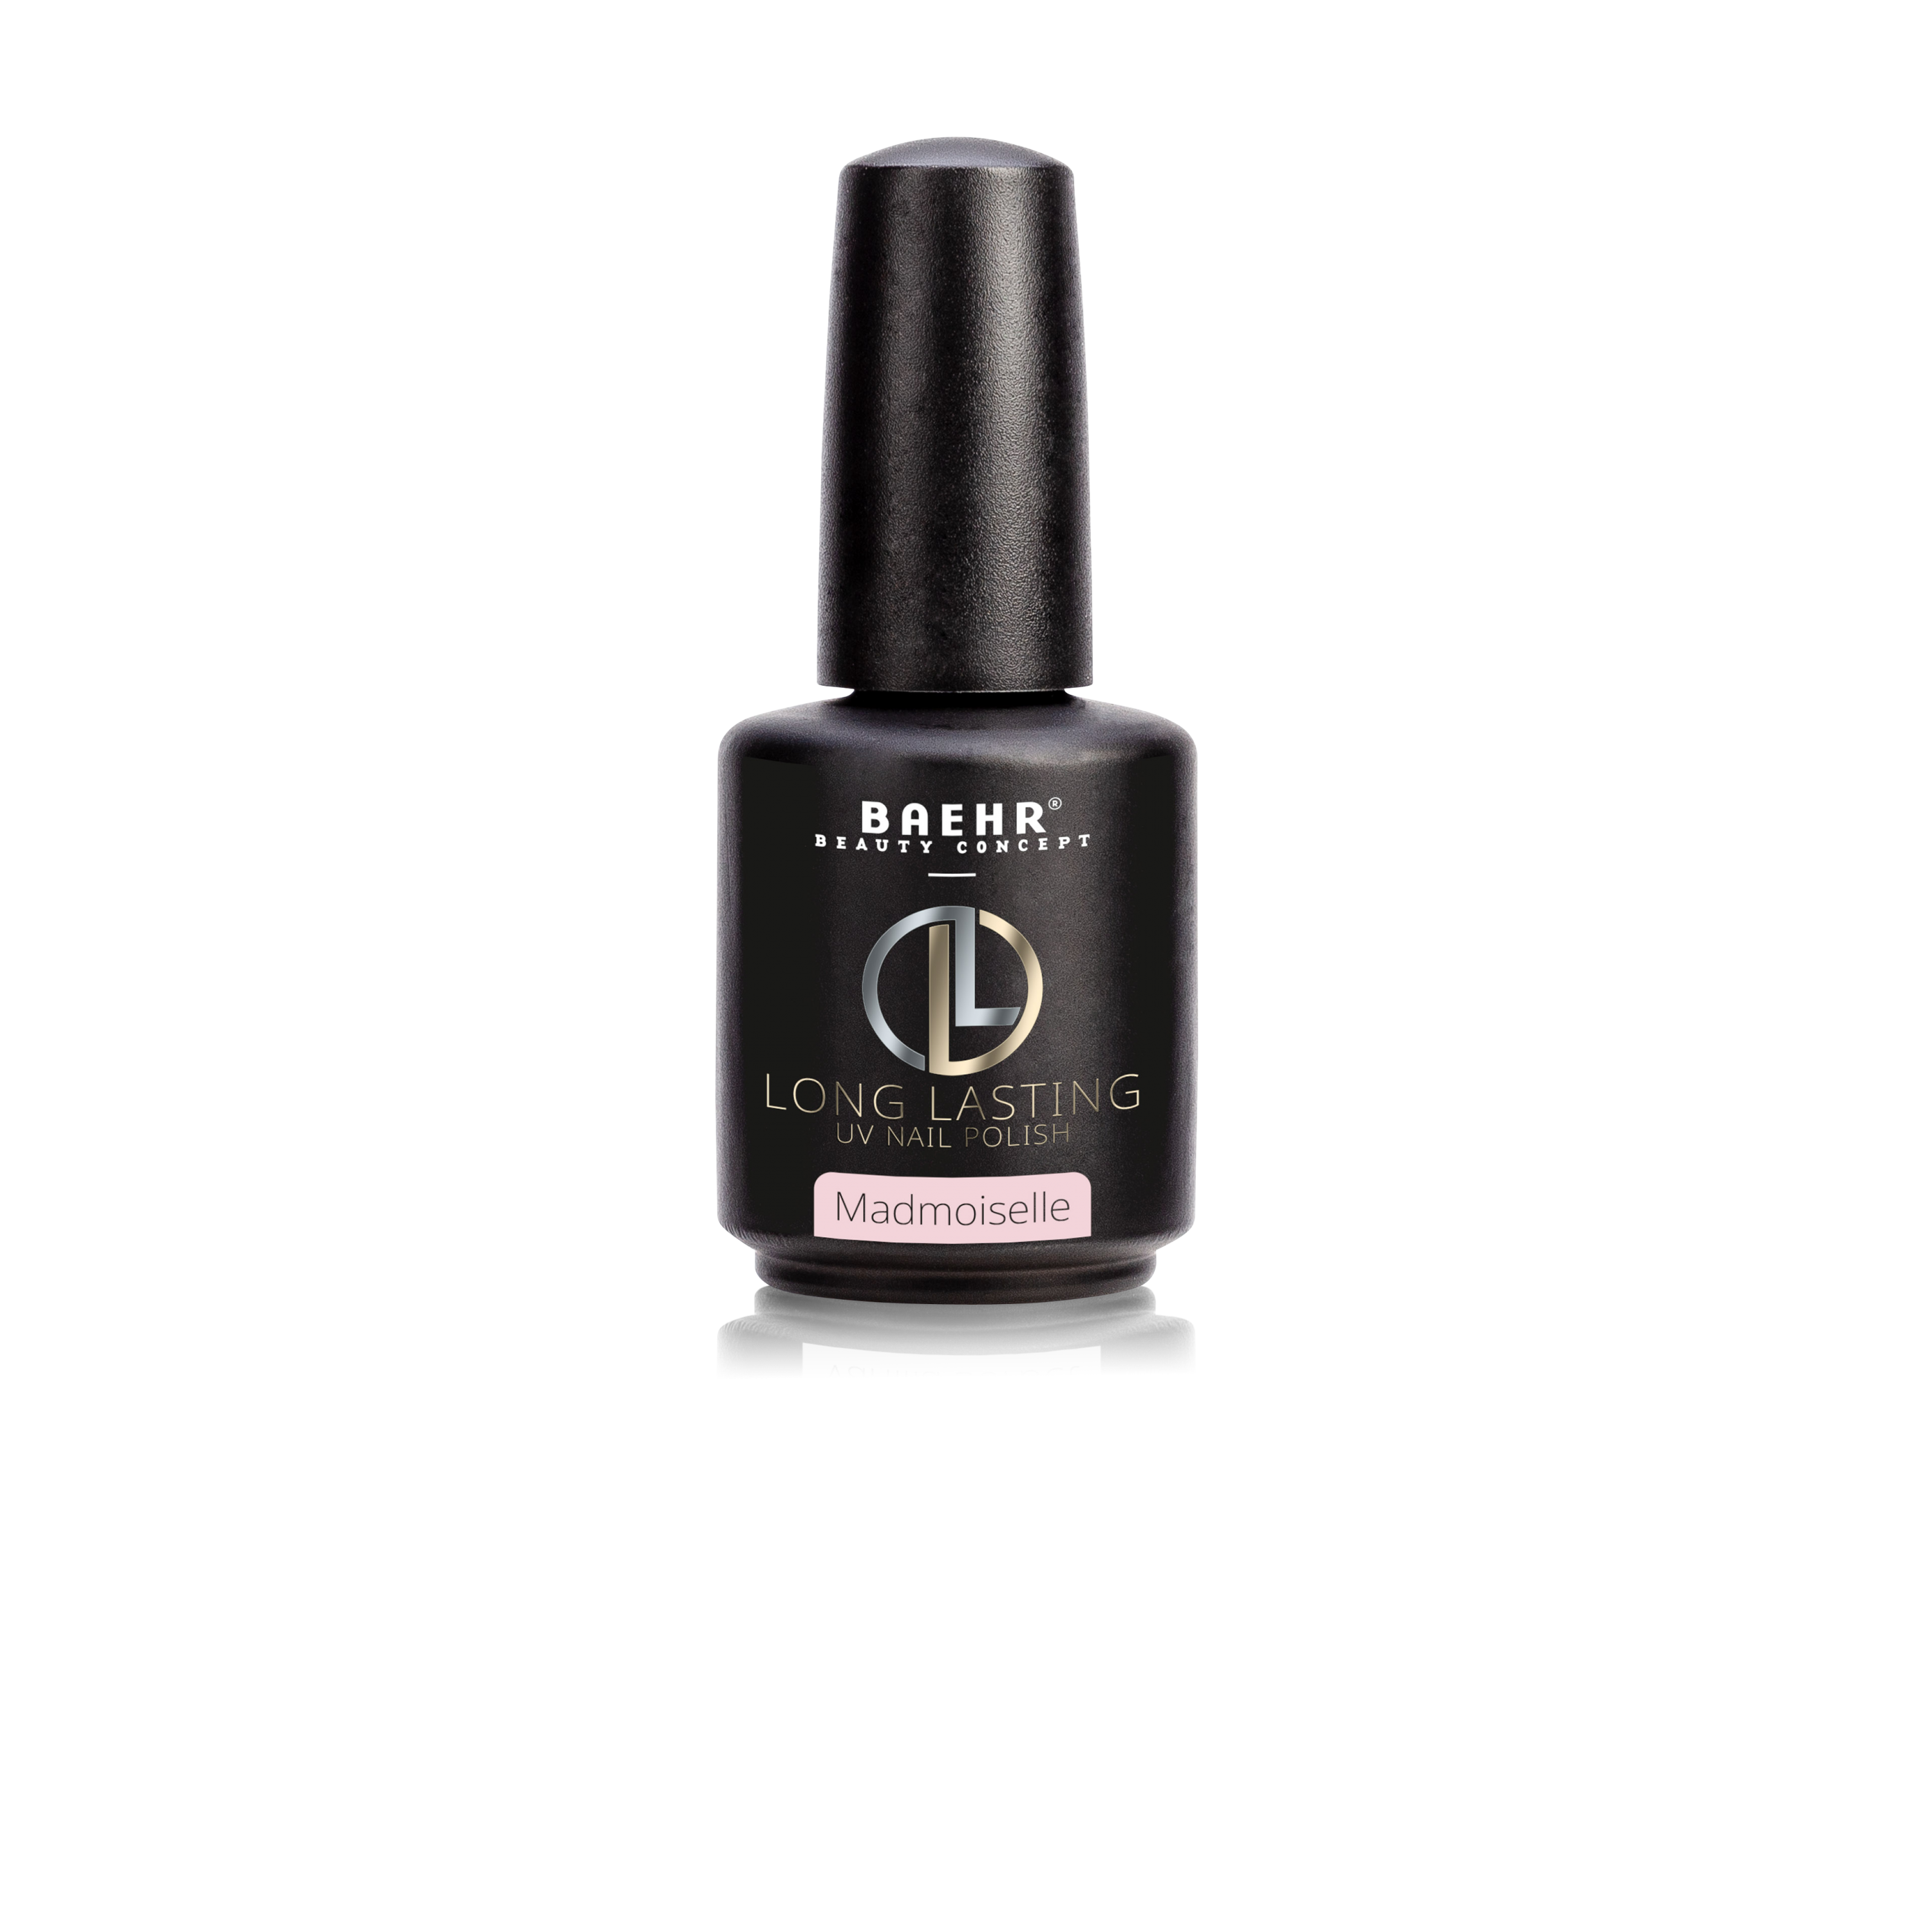 BAEHR BEAUTY CONCEPT - NAILS Long-Lasting Mademoiselle 12 ml